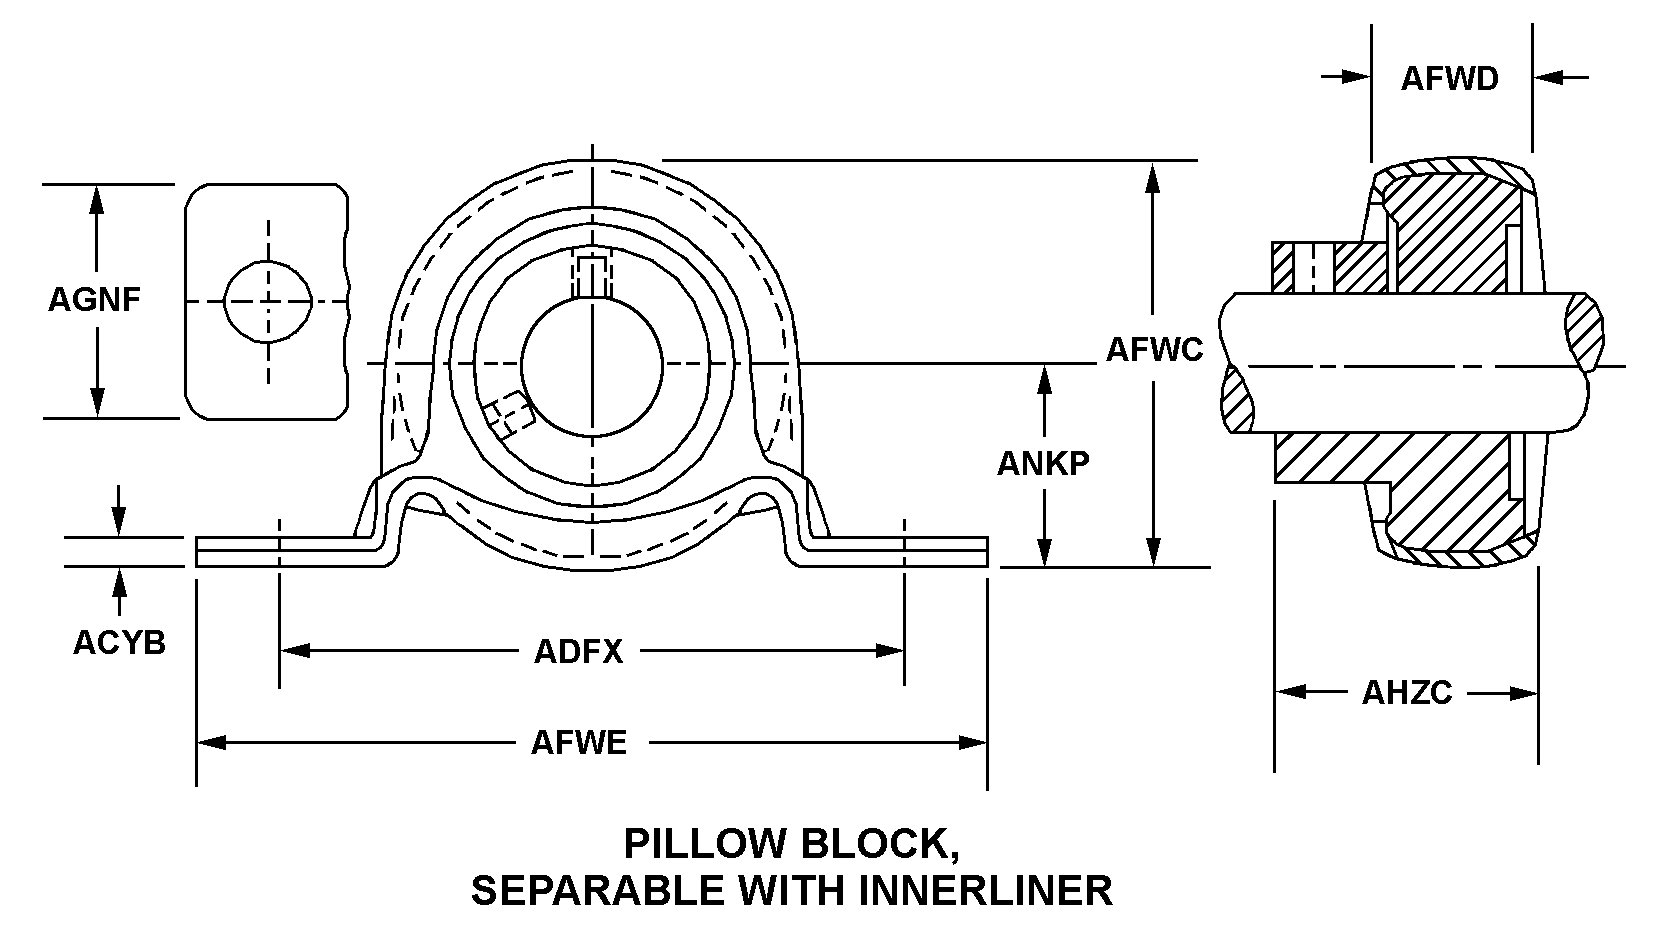 PILLOW BLOCK, SEPARABLE WITH INNERLINER style nsn 3130-01-051-9700